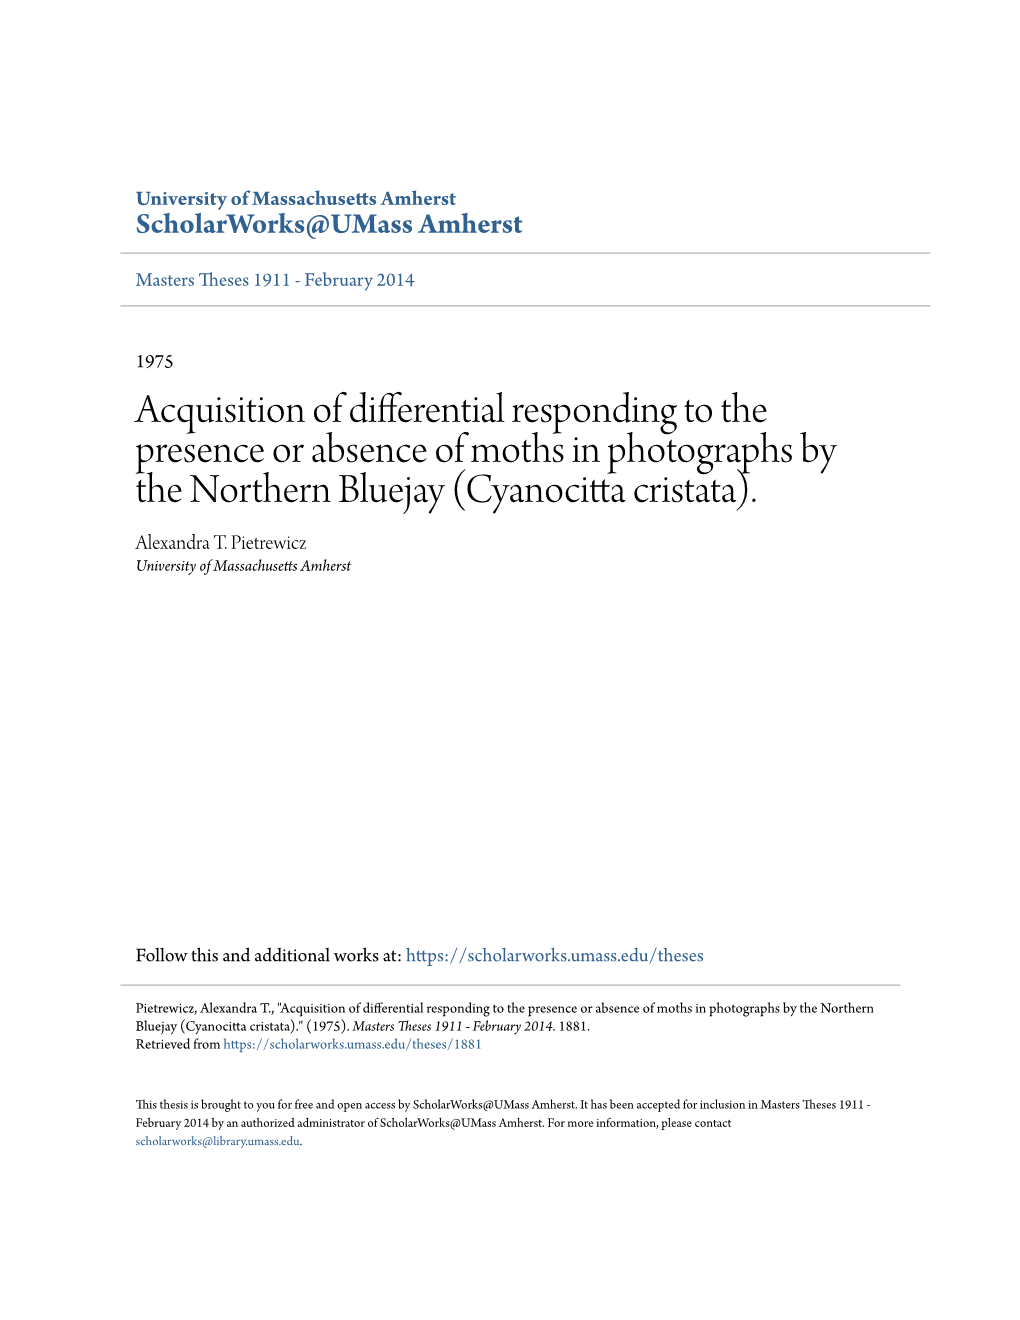 Acquisition of Differential Responding to the Presence Or Absence of Moths in Photographs by the Northern Bluejay (Cyanocitta Cristata)